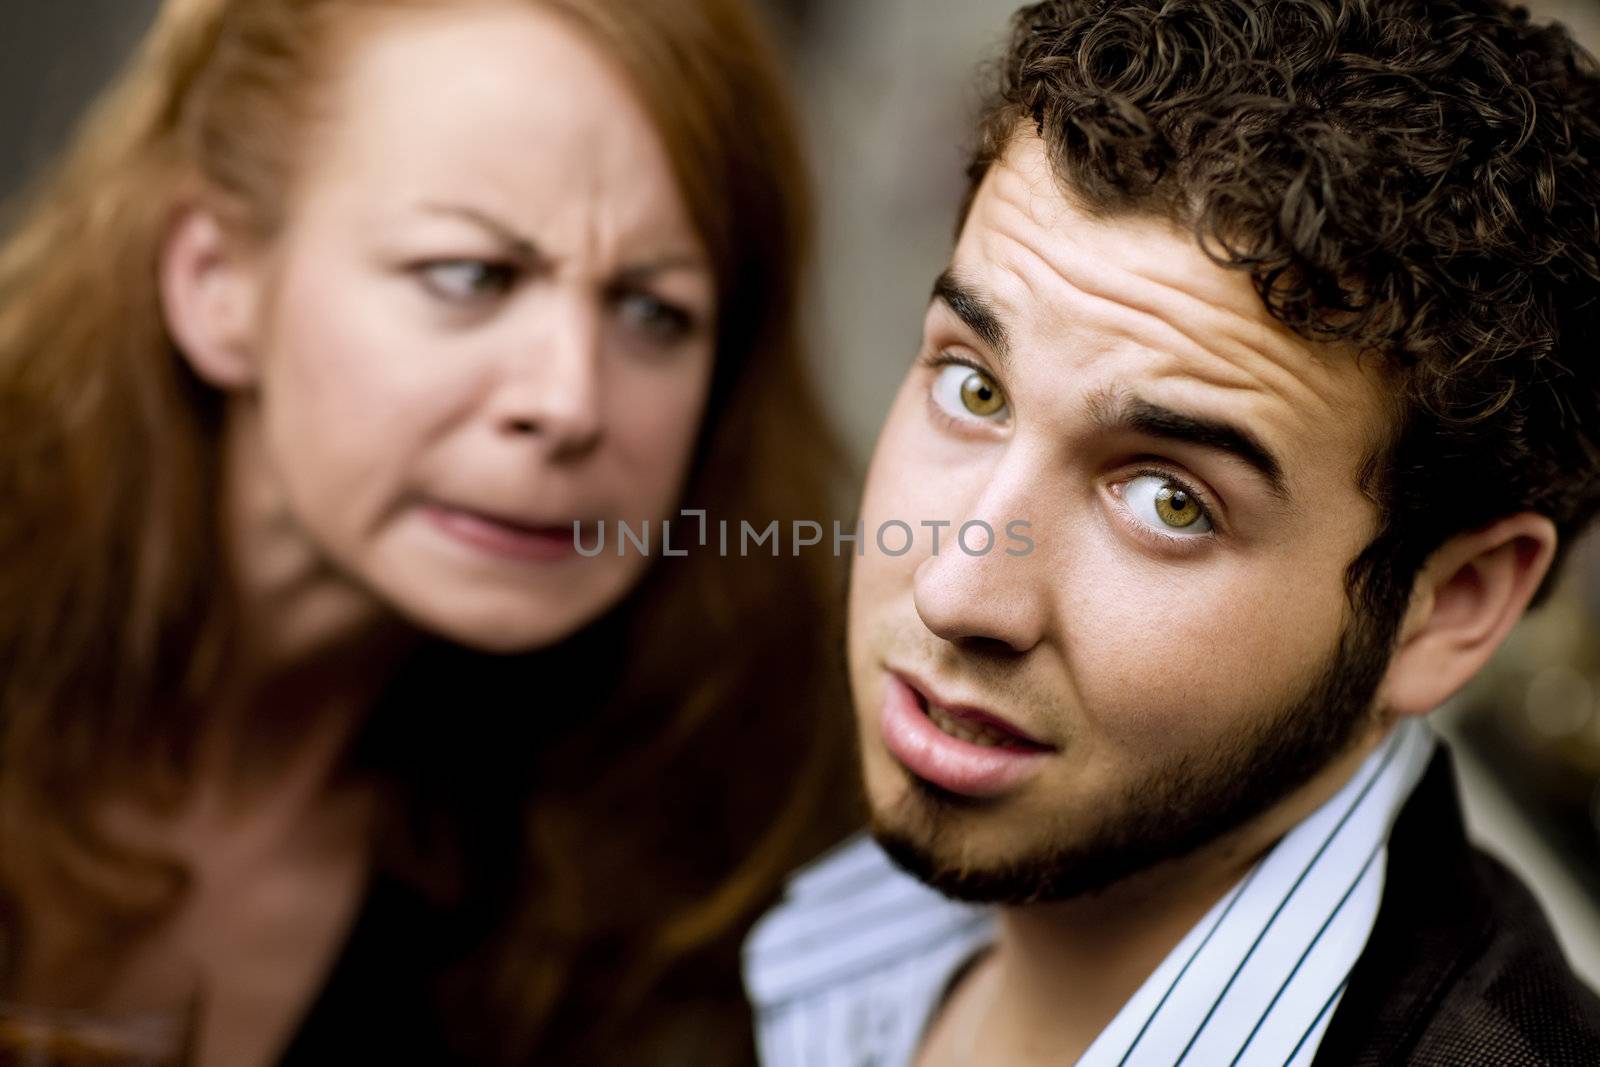 Young woman directs her anger at a man